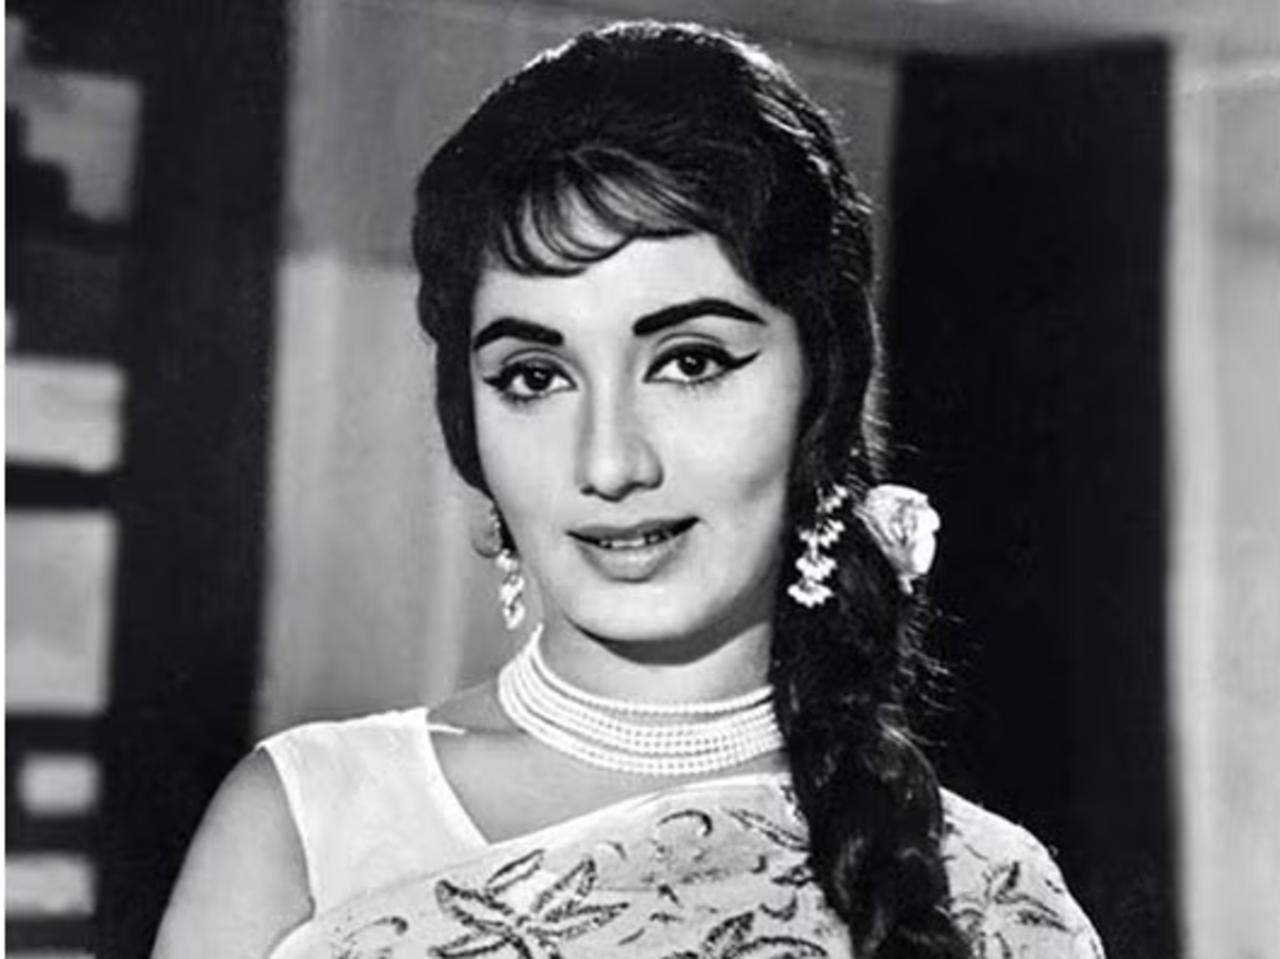 Sadhana’s fringe
Sadhana was quite the Bollywood beauty from the black-and-white cinema of the '60s. She flaunted her fringe hairdo – reminiscent of Audrey Hepburn from Roman Holiday, in films like 'Love in Shimla' and caused a stir amongst women at the time